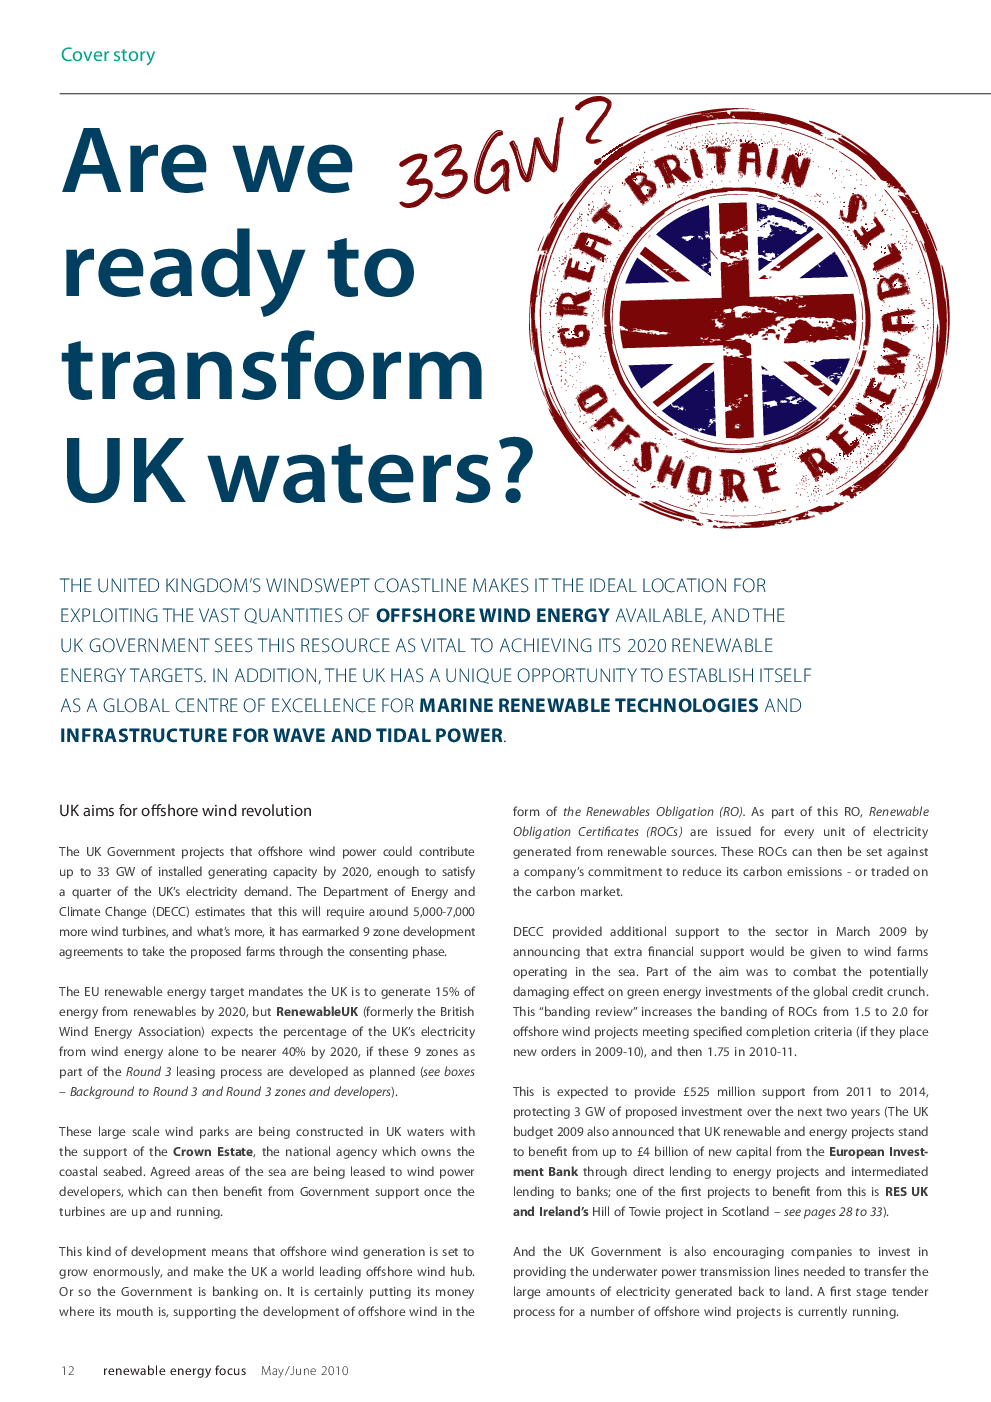 Are we ready to transform UK waters?